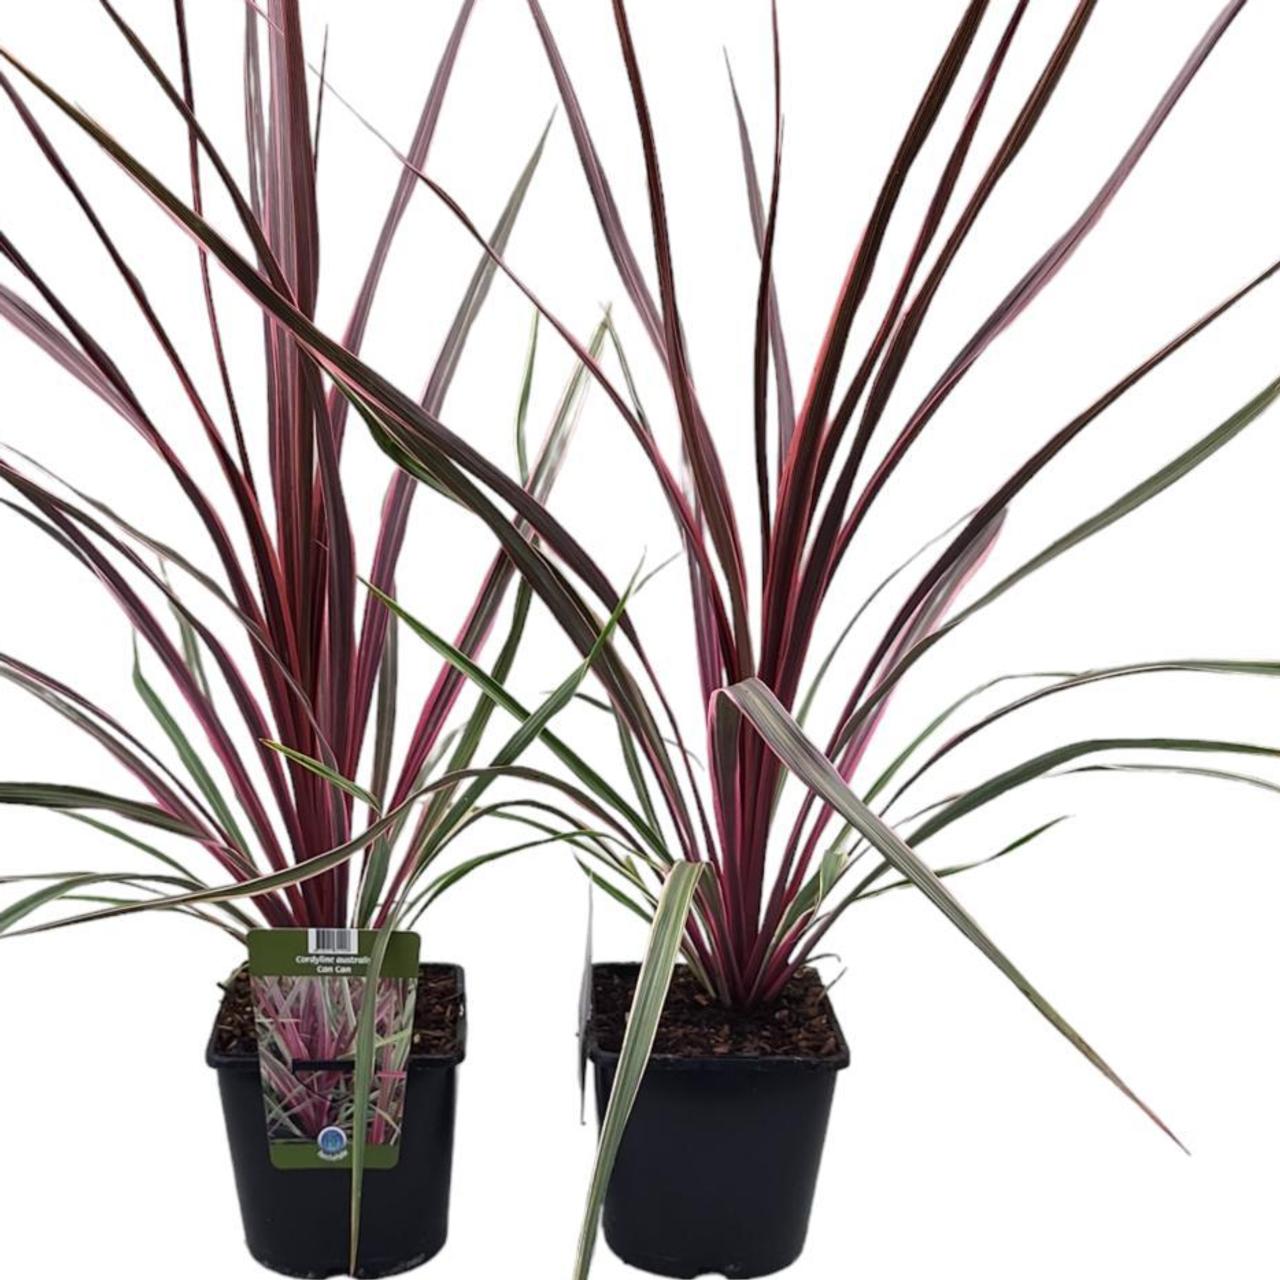 Cordyline australis 'Can Can' plant